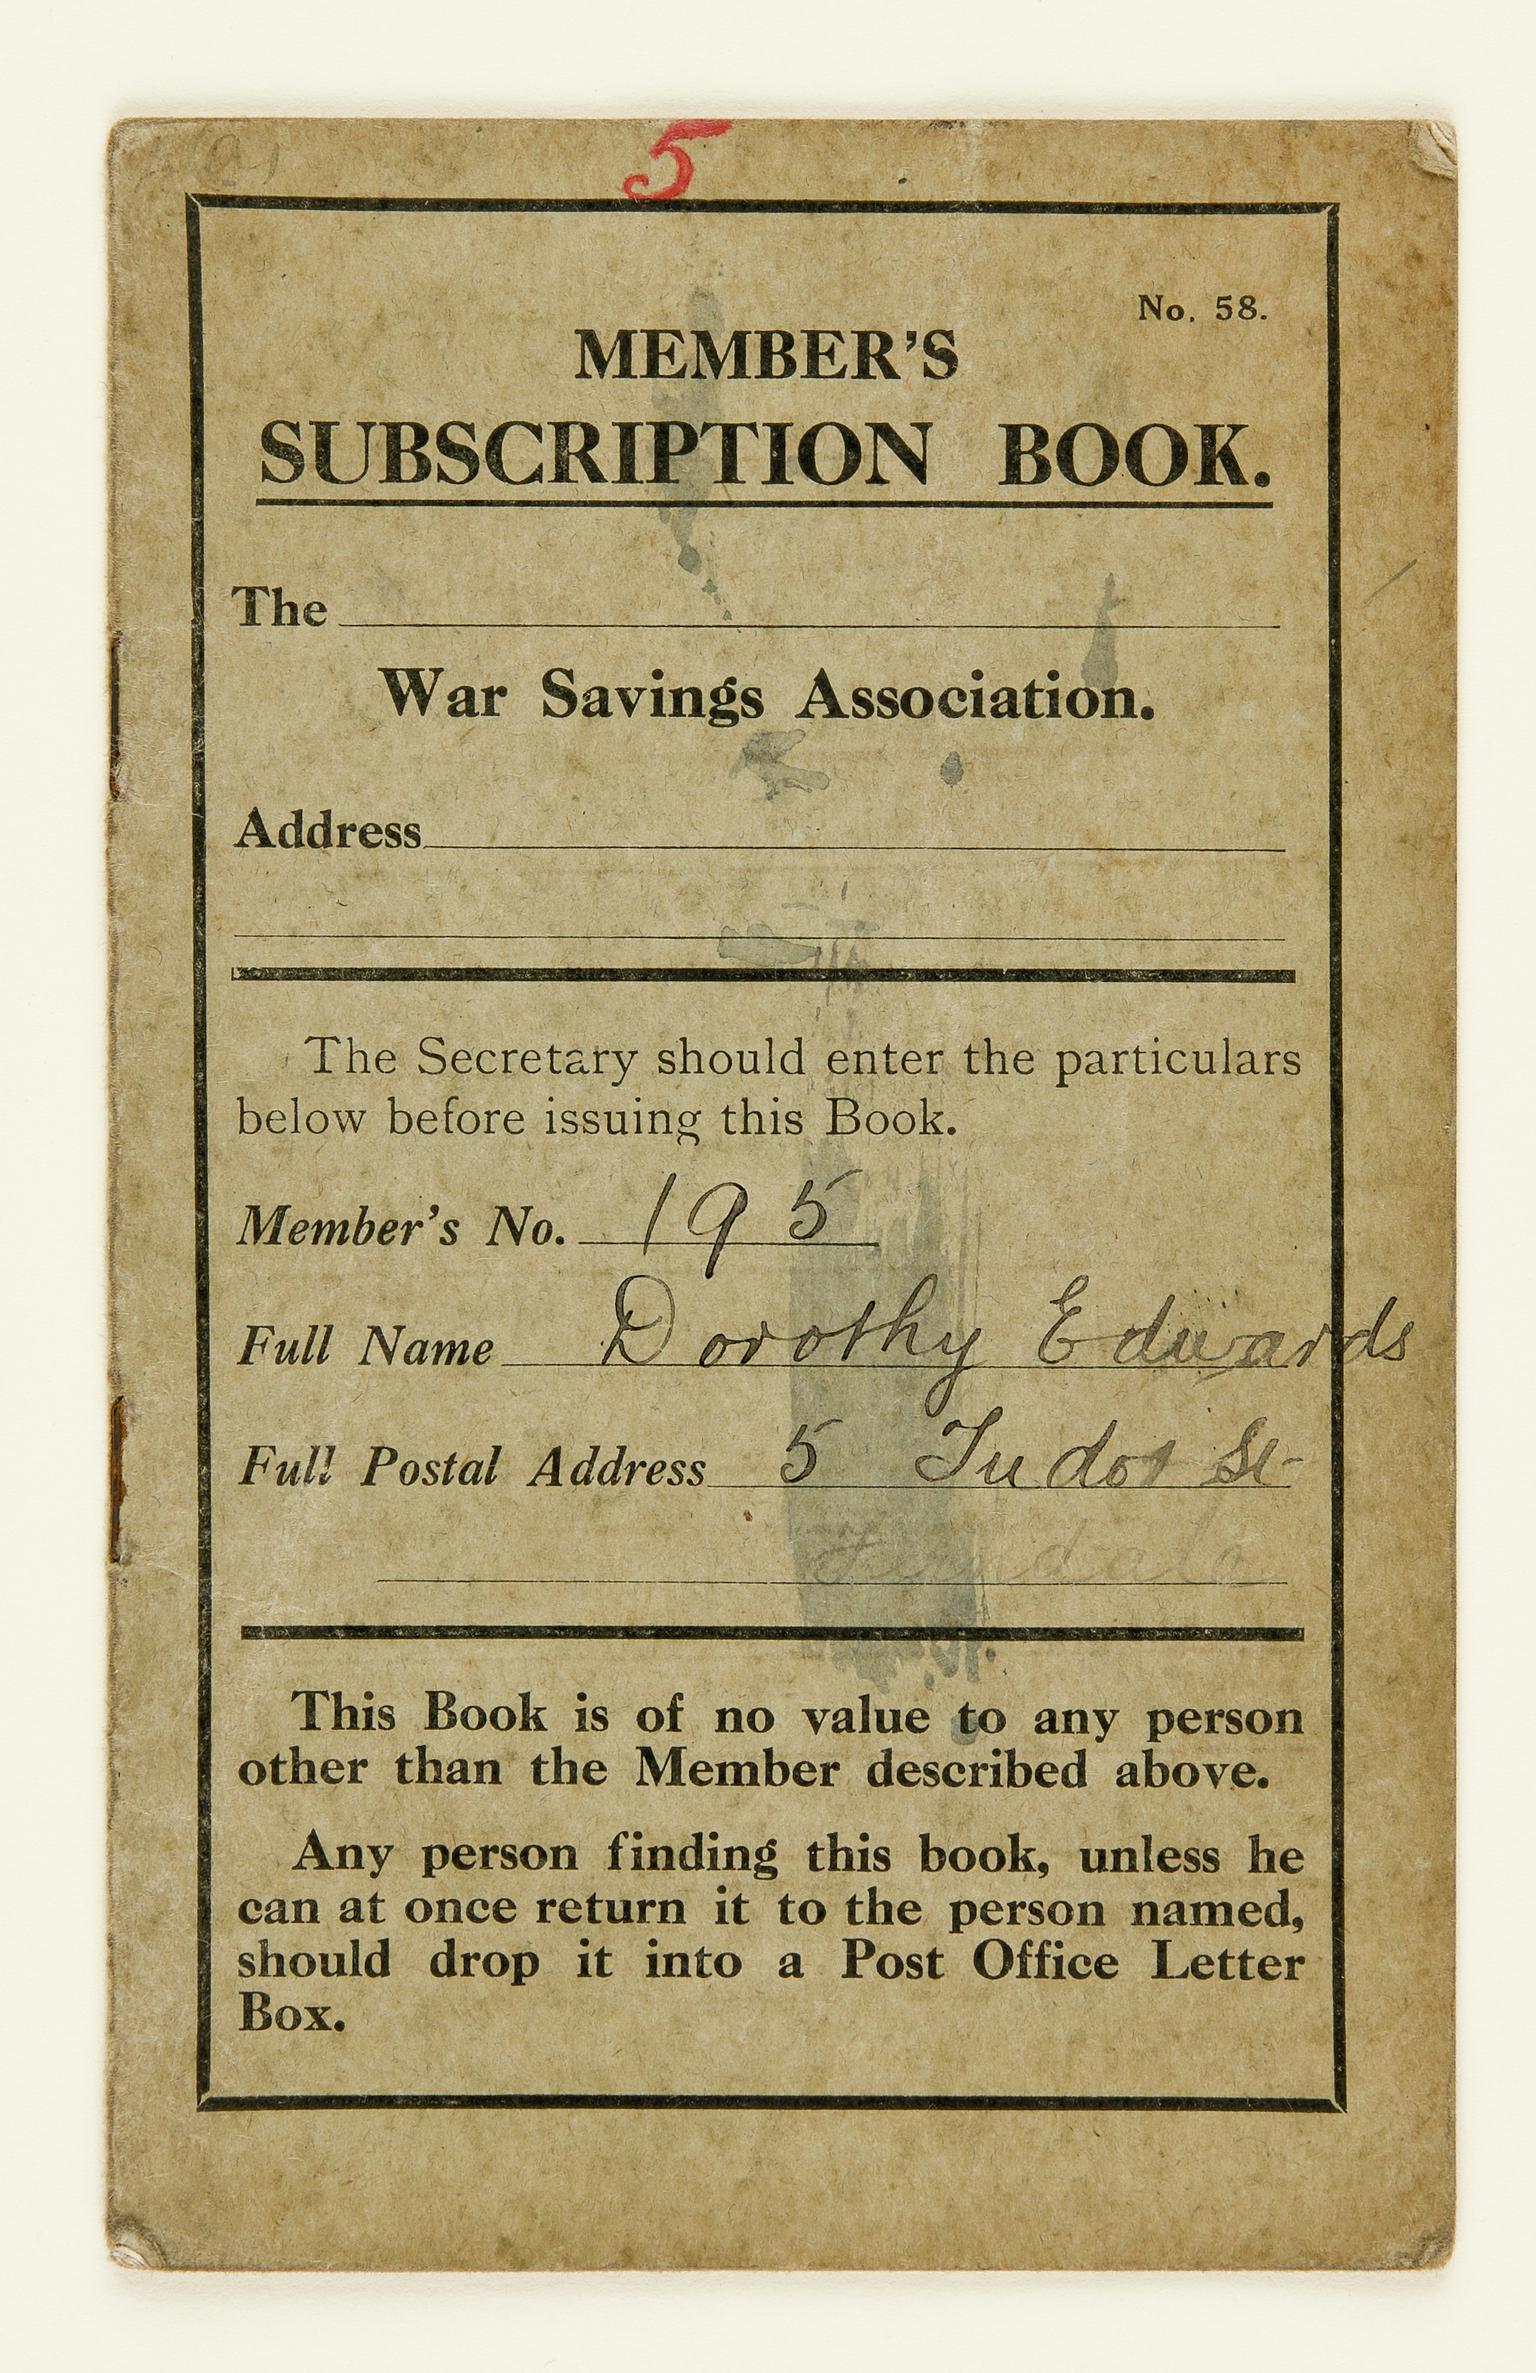 Subscription book